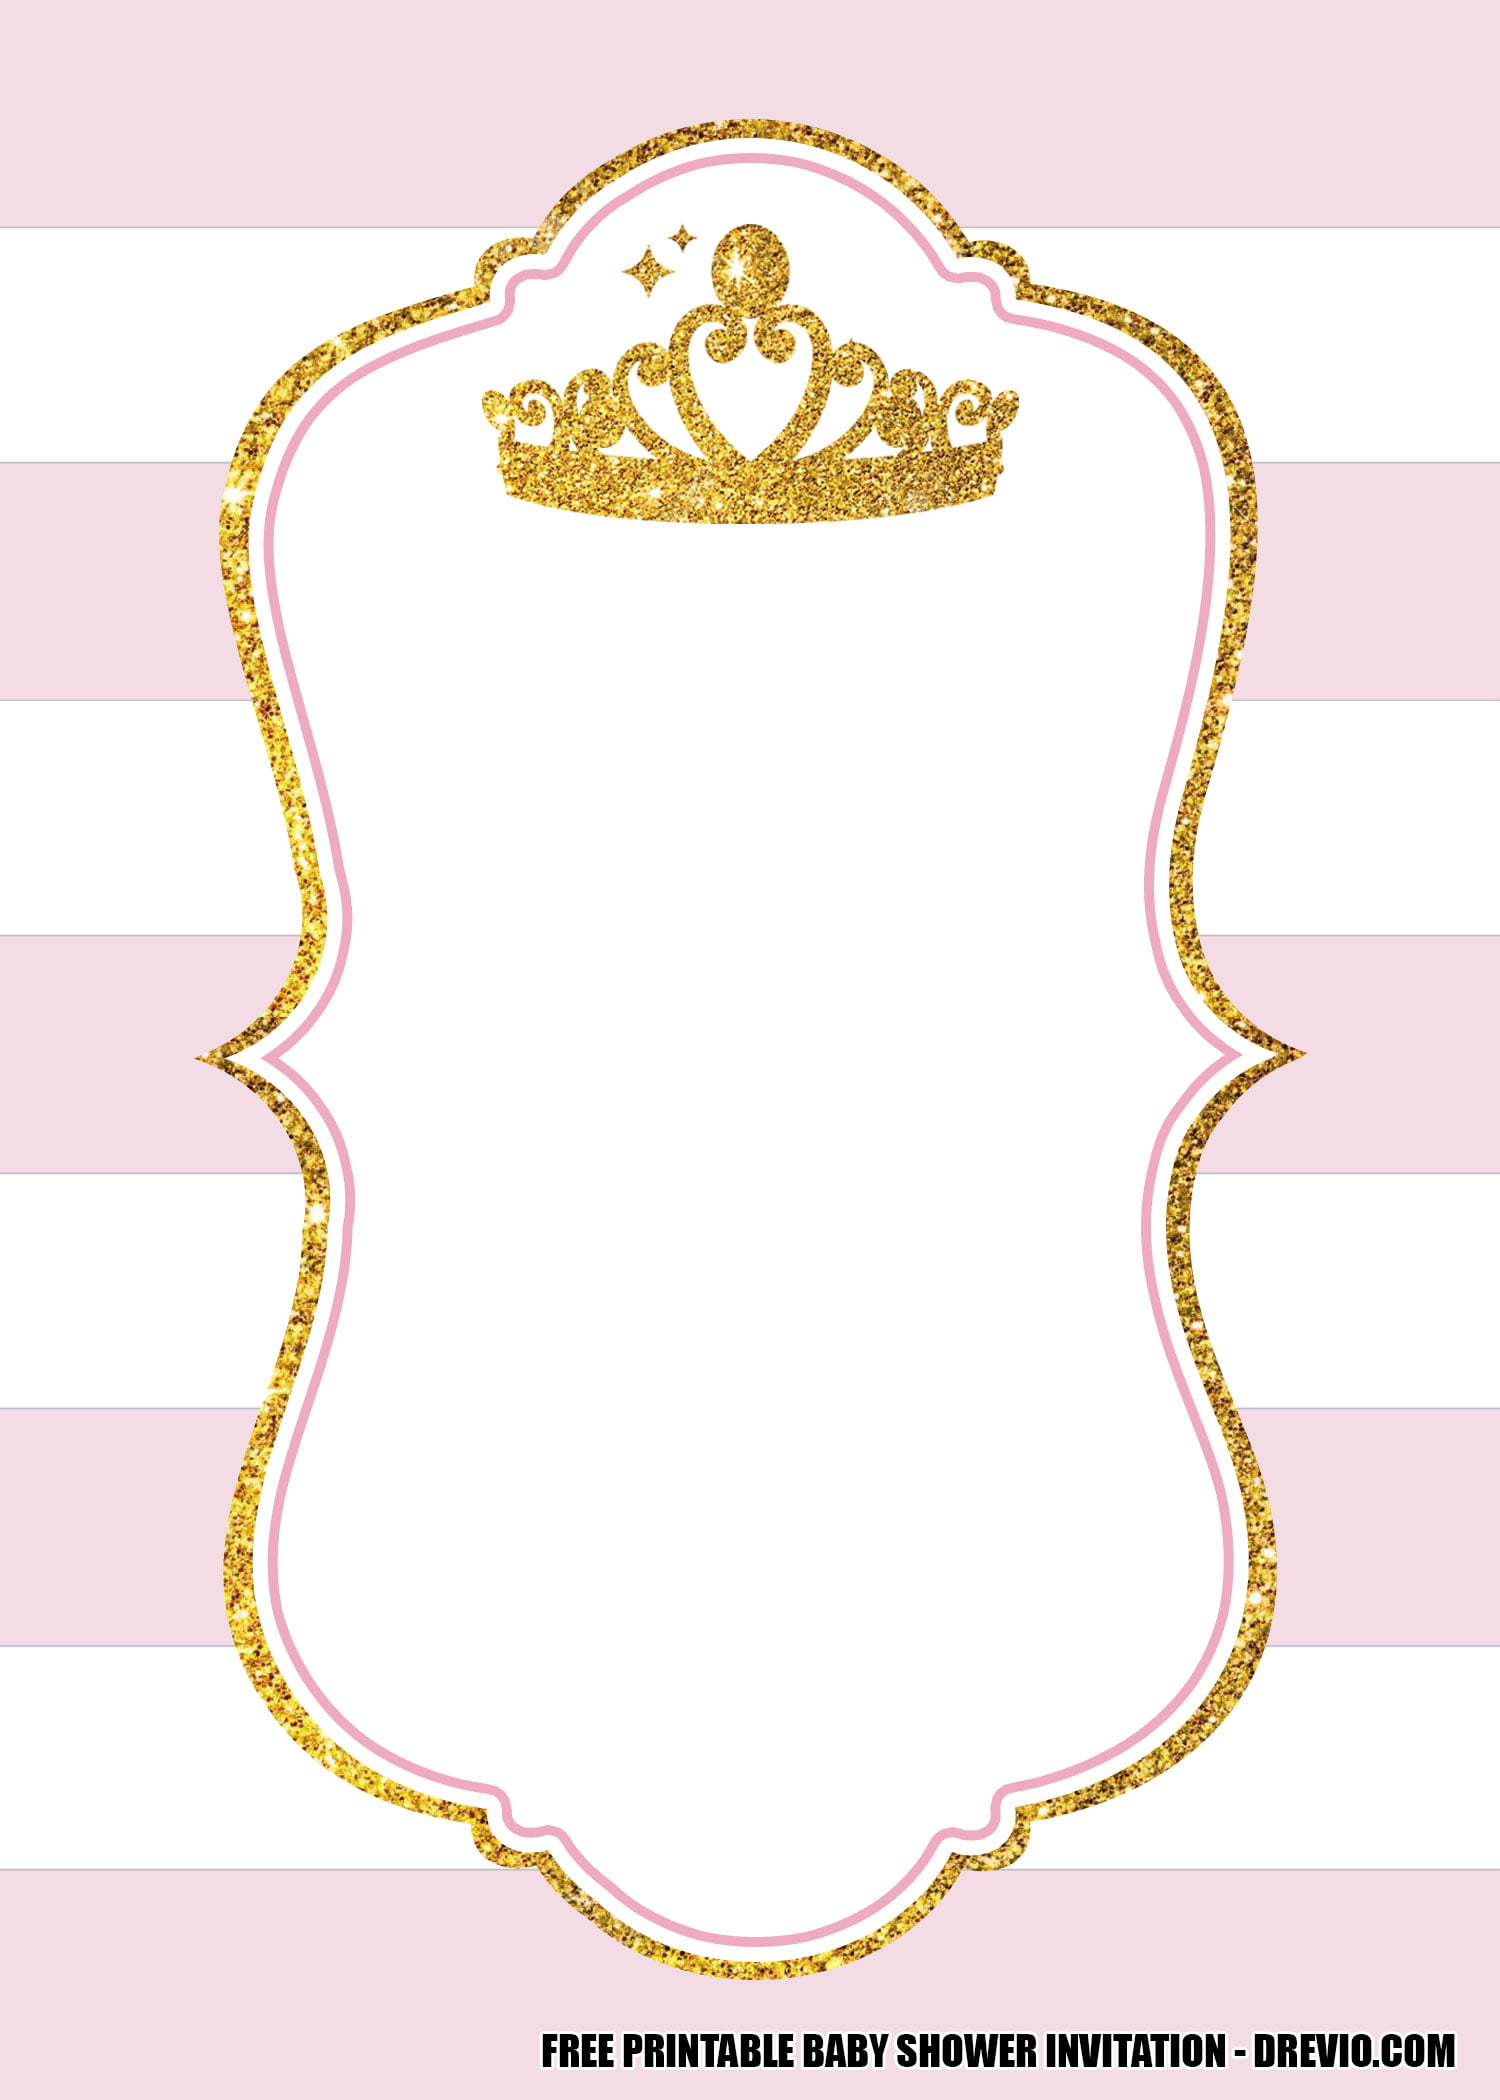  Pink princess crown blank parchment scroll with gold